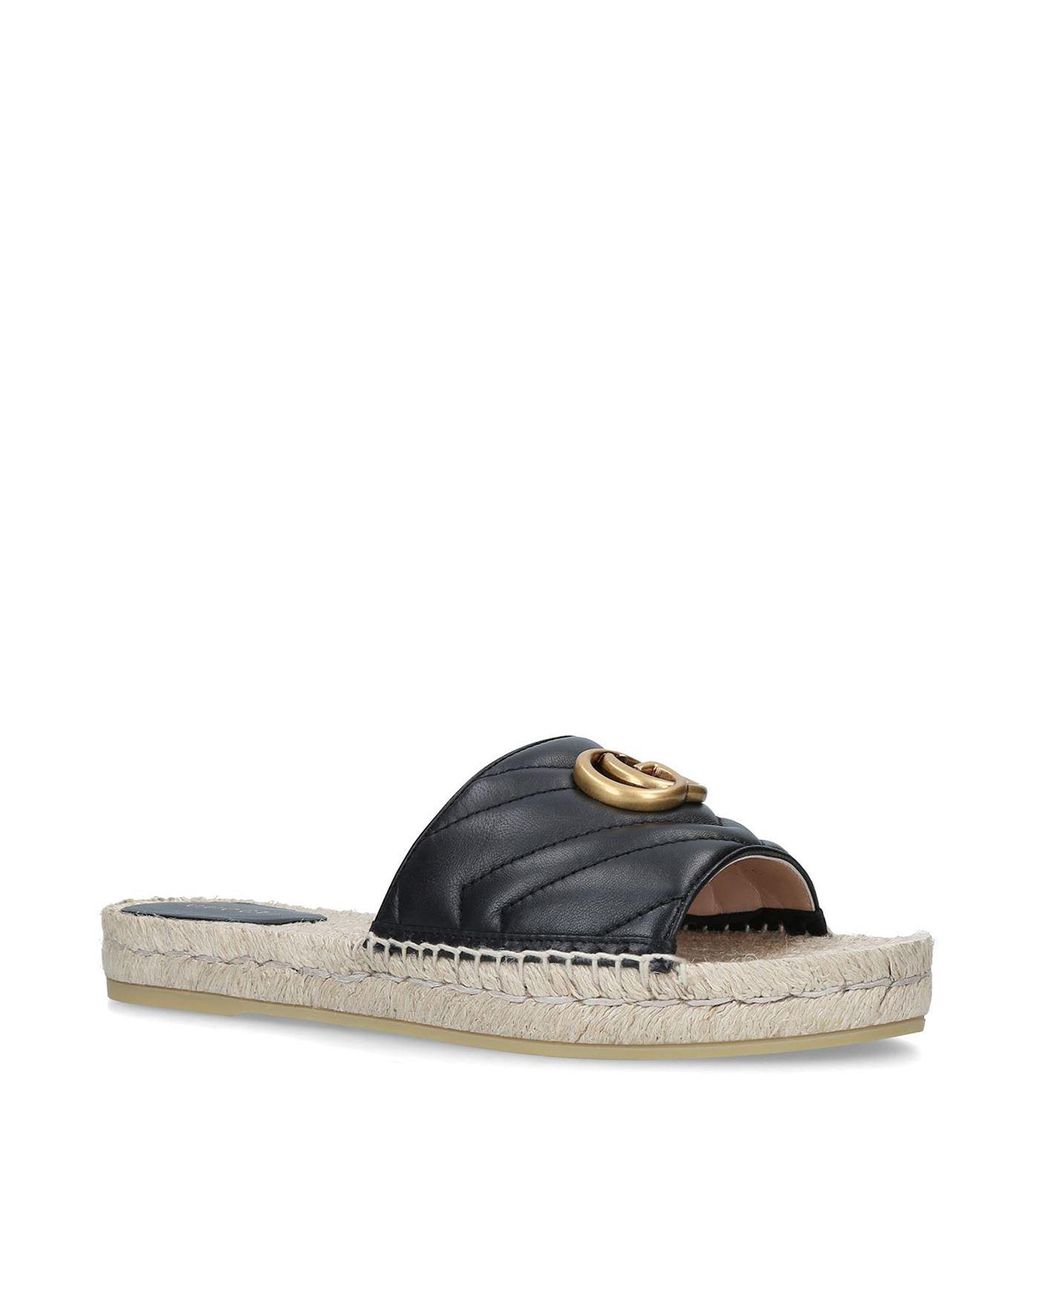 Gucci Leather Espadrille Sandals in Black - Save 38% - Lyst